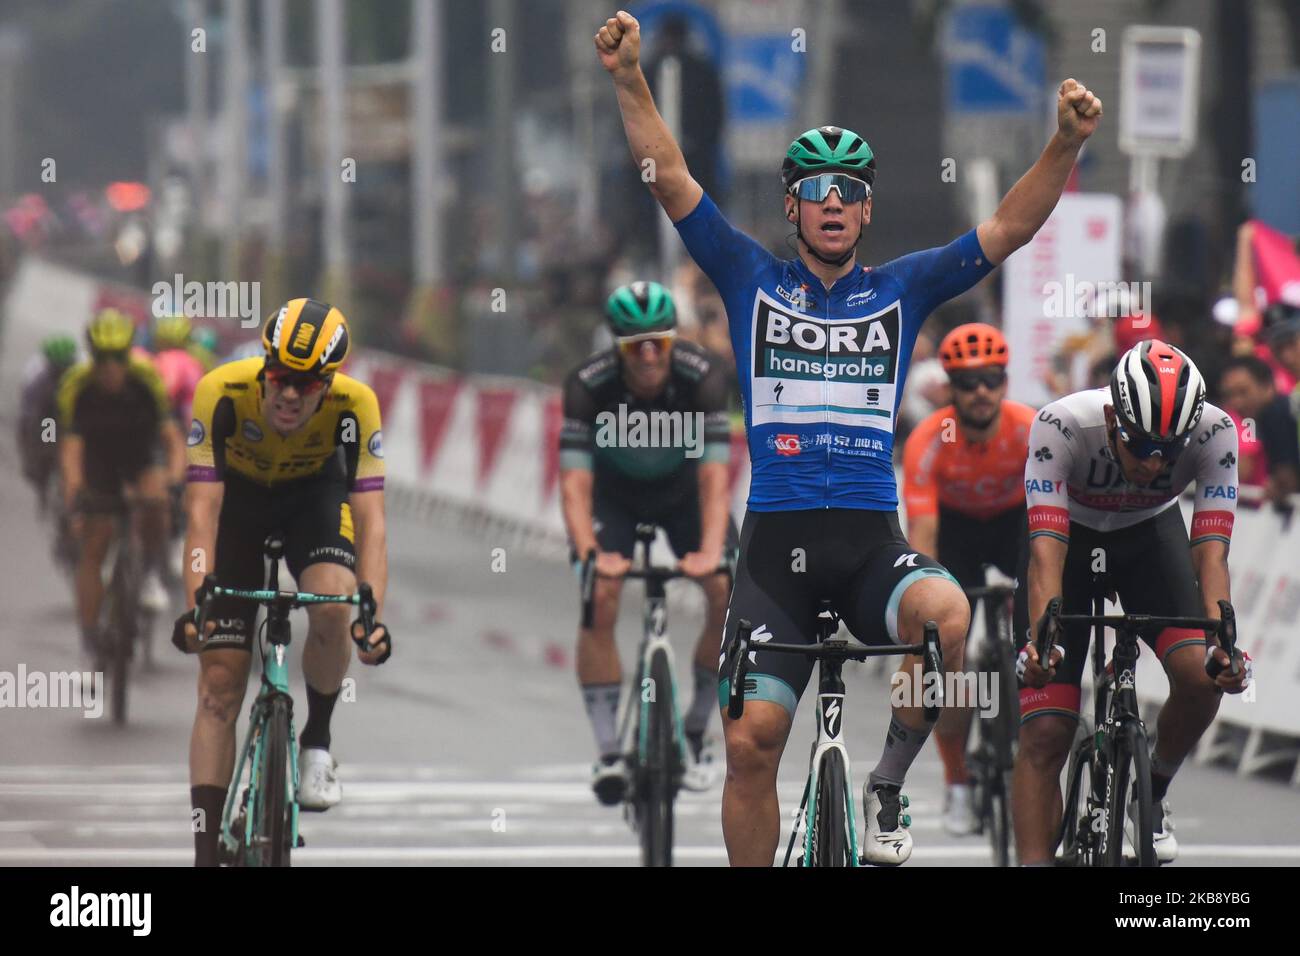 Pascal Ackermann (Center Right) of Germany and Team Bora-Hansgrohe, wins the six stage, 168.3km Guilin Stage Race, of the 3rd edition of the Cycling Tour de Guangxi 2019, . On Tuesday, October 22, 2019, in Guilin, Guangxi Region, China. (Photo by Artur Widak/NurPhoto) Stock Photo